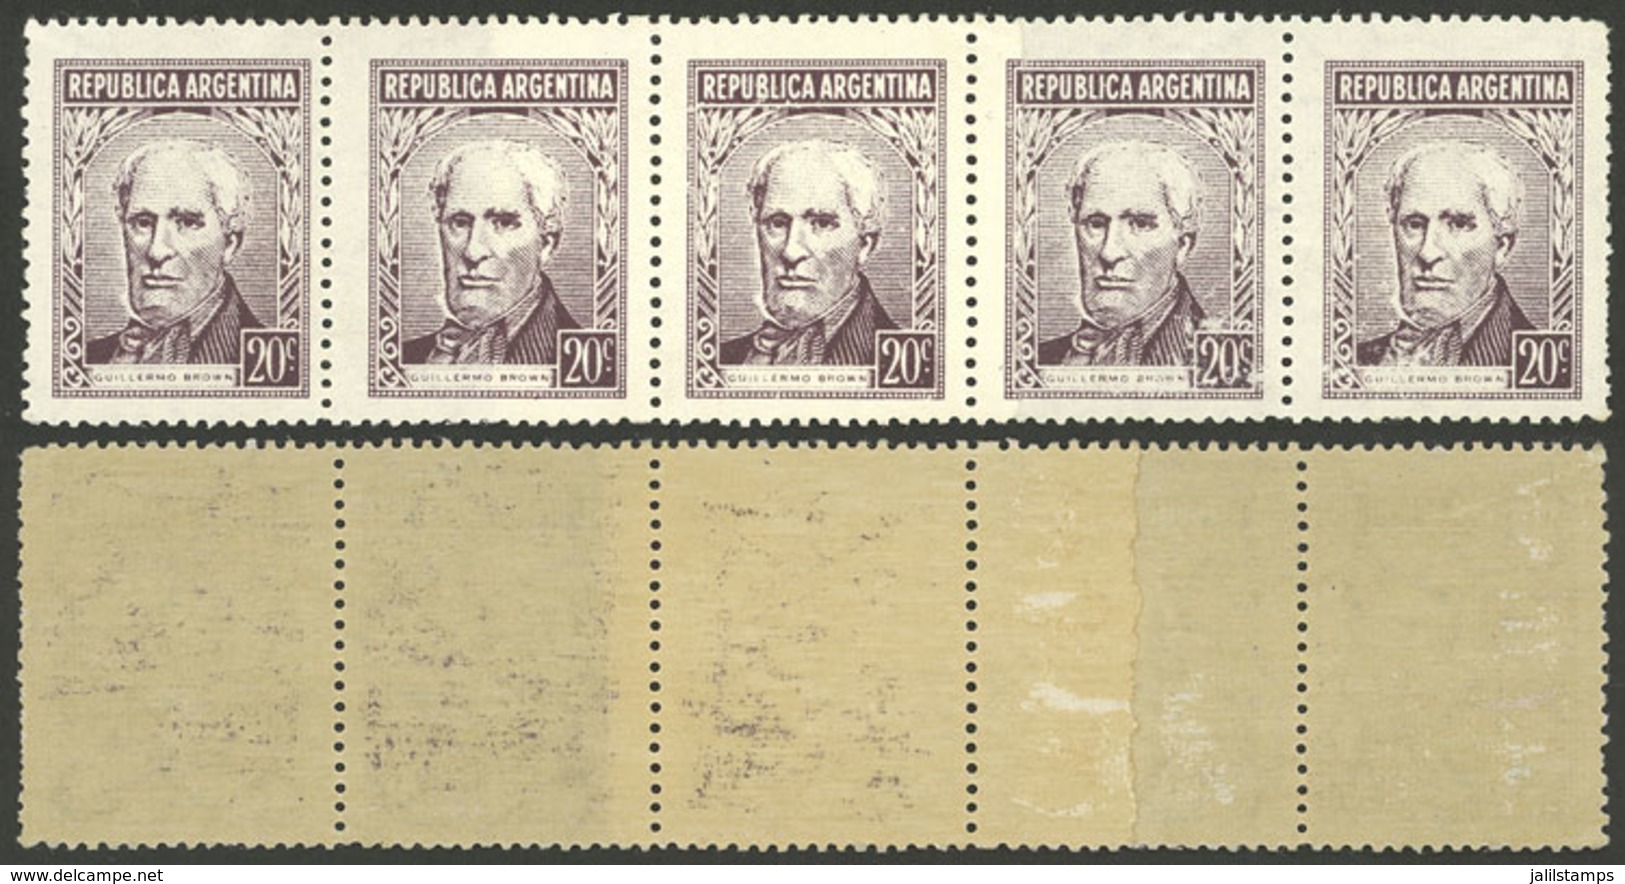 ARGENTINA: GJ.1038, Strip Of 5 With END-OF-ROLL DOUBLE PAPER Variety, VF Quality! - Ungebraucht